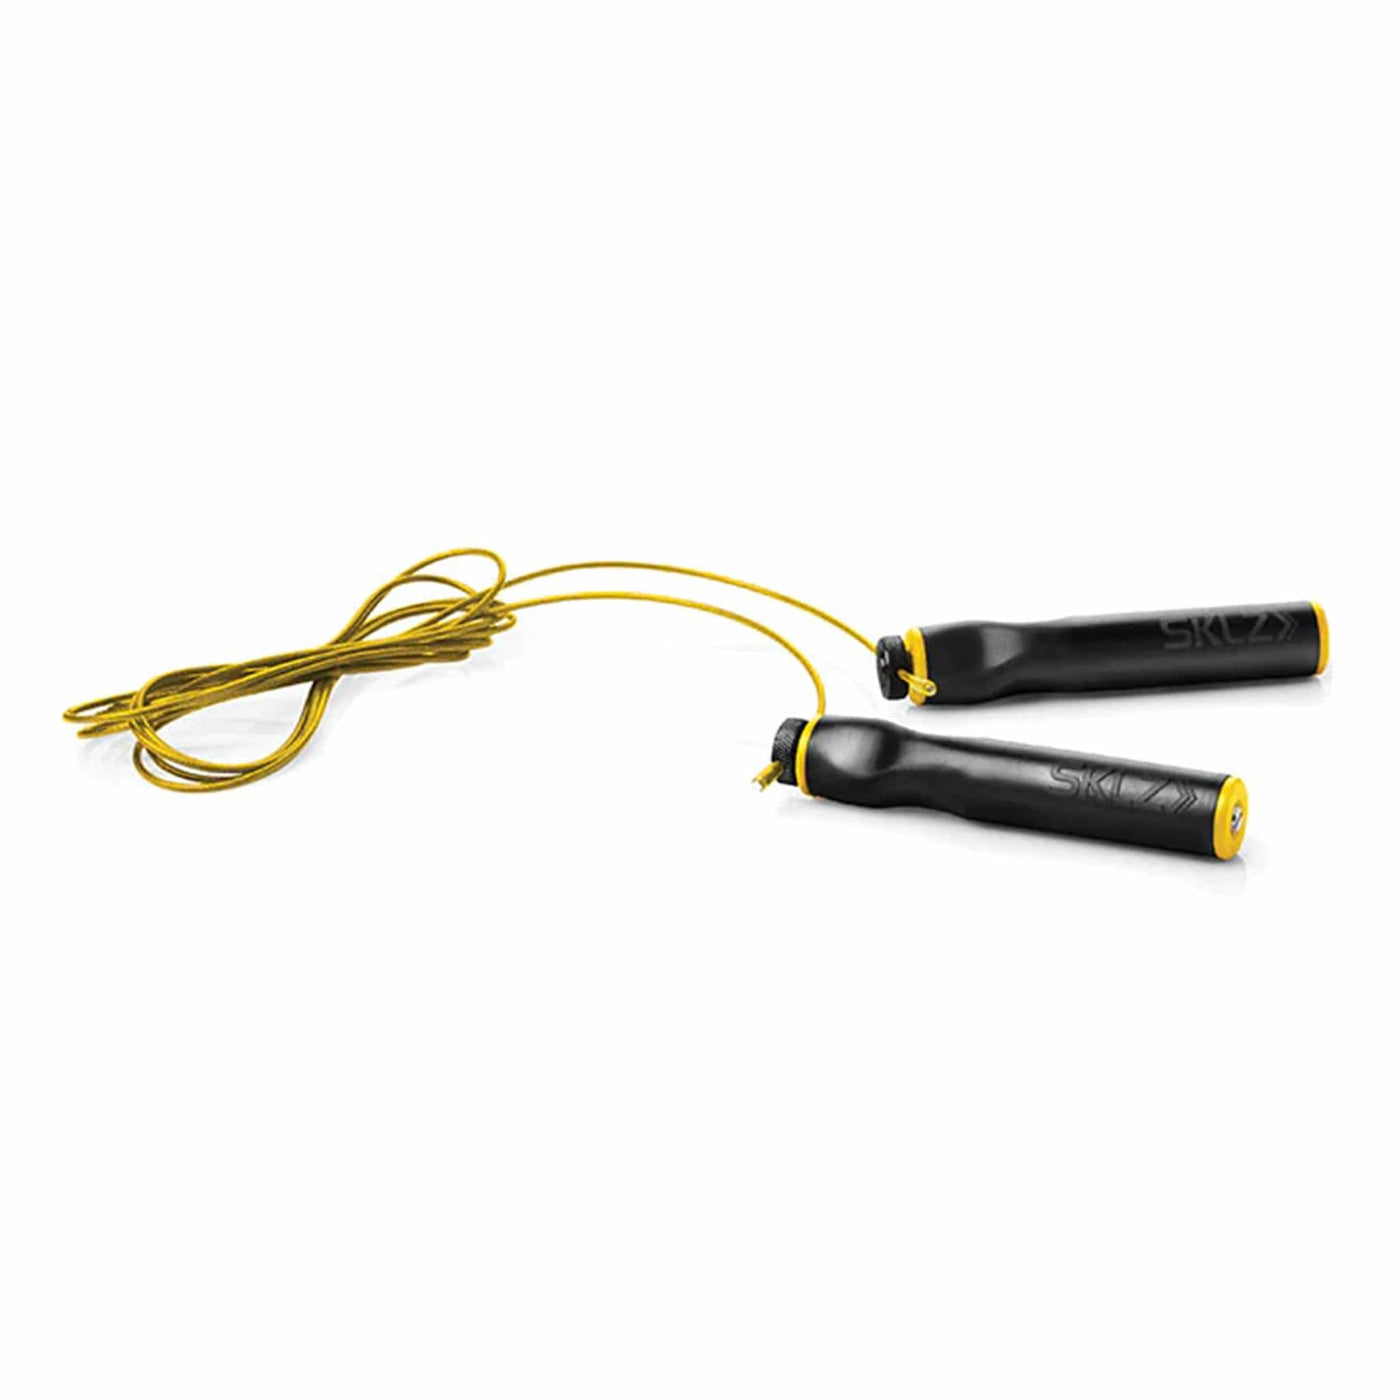 SKLZ Speed Rope - The Hockey Shop Source For Sports